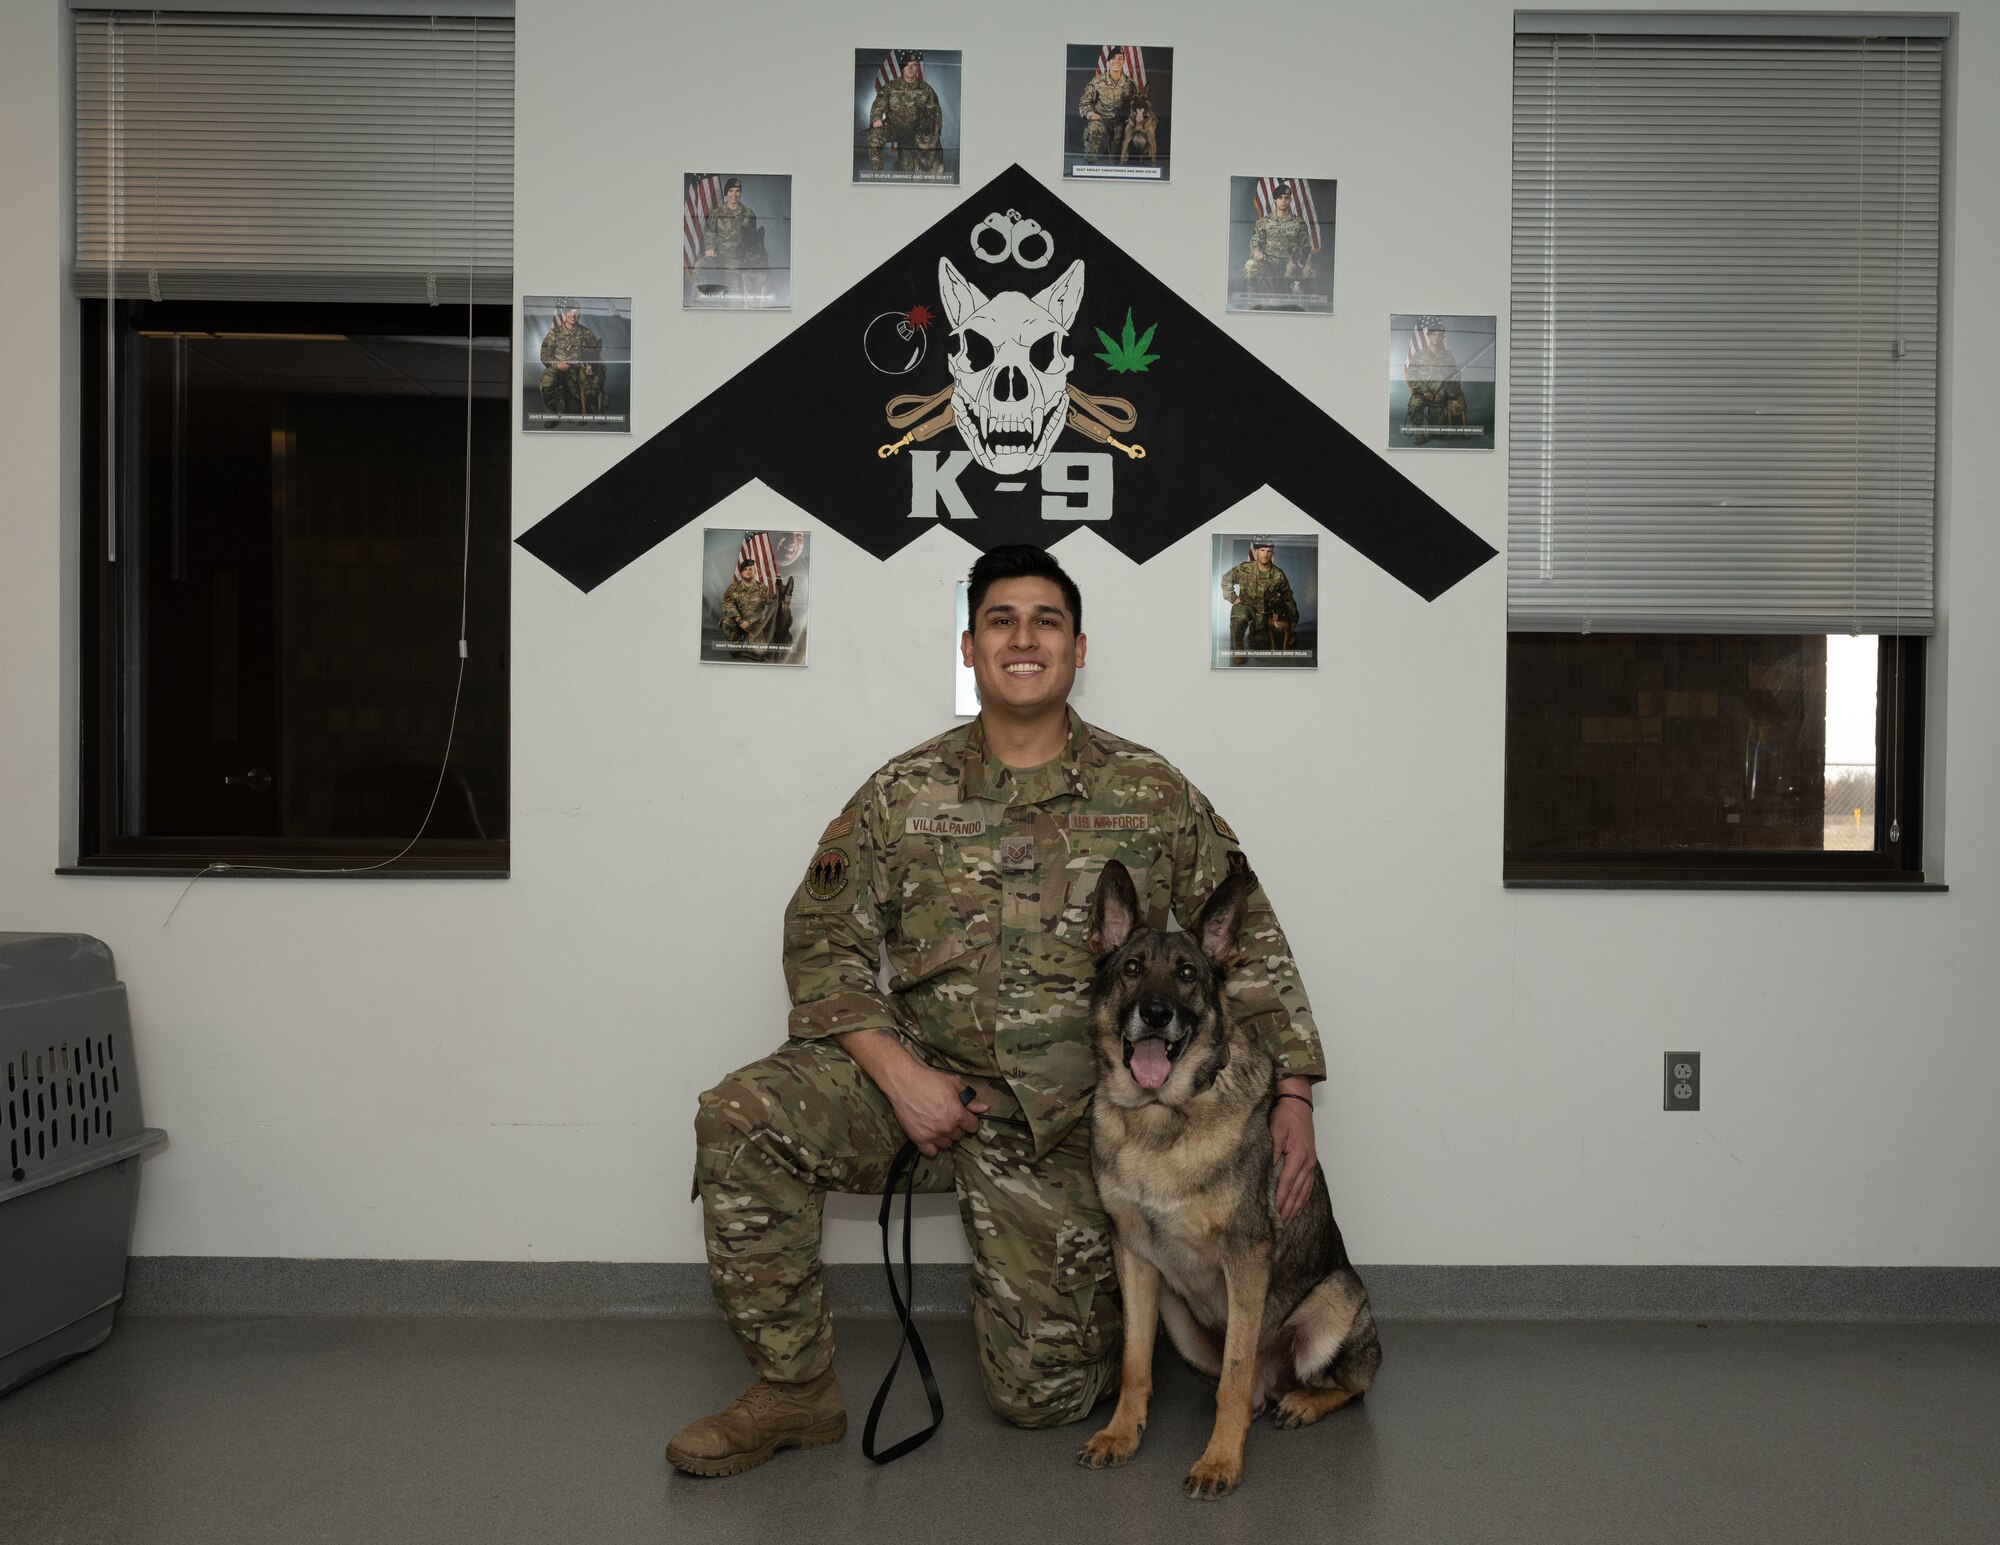 U.S. Air Force Staff Sgt. Alex Villalpando, 509 Security Forces military working dog handler, poses for a photo with MWD Stiffler in front of a wall showcasing military working dogs and their handlers at the MWD kennels on Whiteman Air Force Base Jan. 19, 2022. Military working dogs provide a valuable force multiplier to aid in security and readiness within our units. (U.S. Air Force photo by Airman 1st Class Bryson Britt)